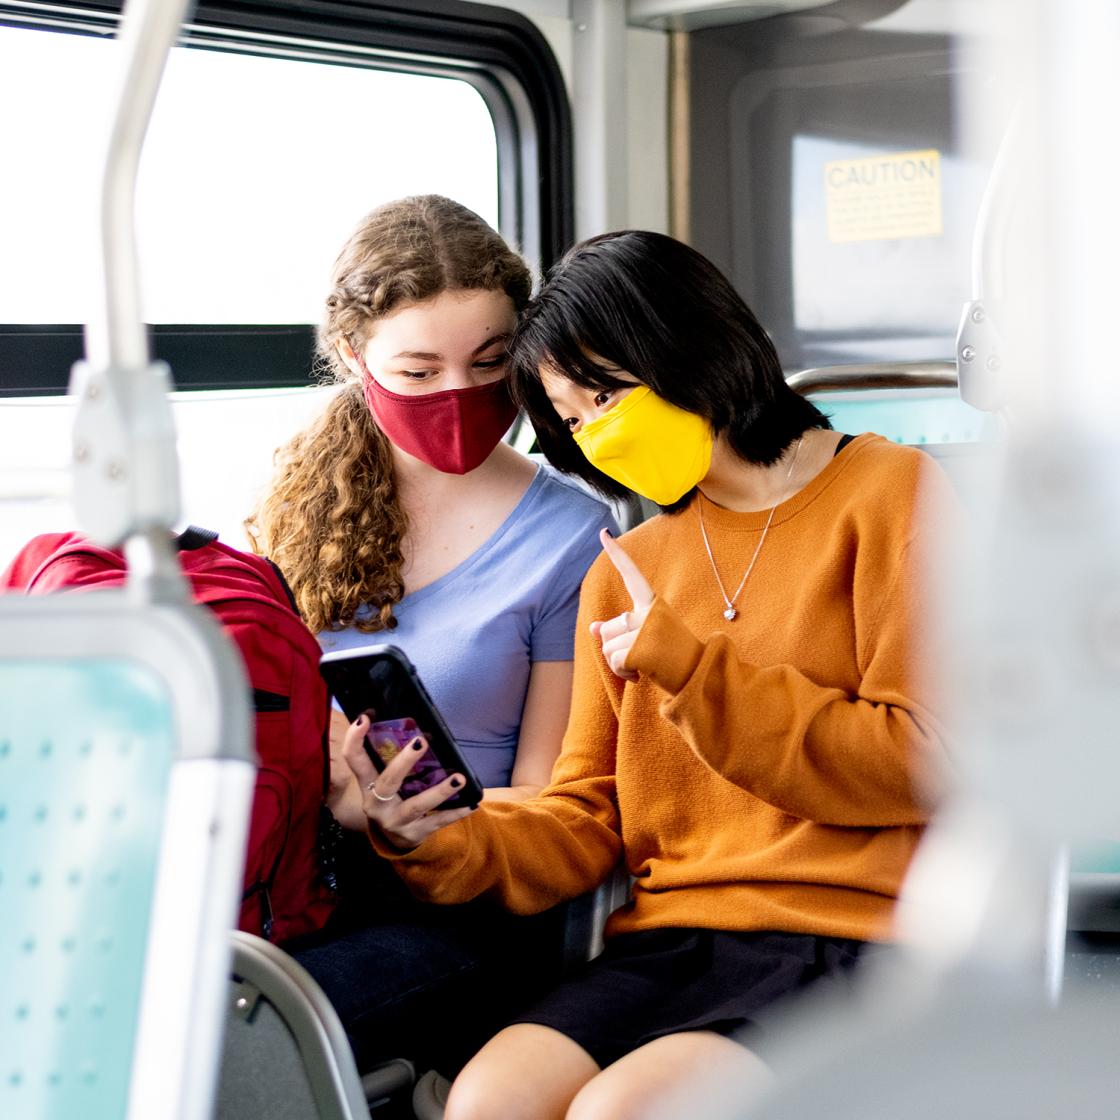 Two girls with masks on, sitting on the bus, looking at a phone screen